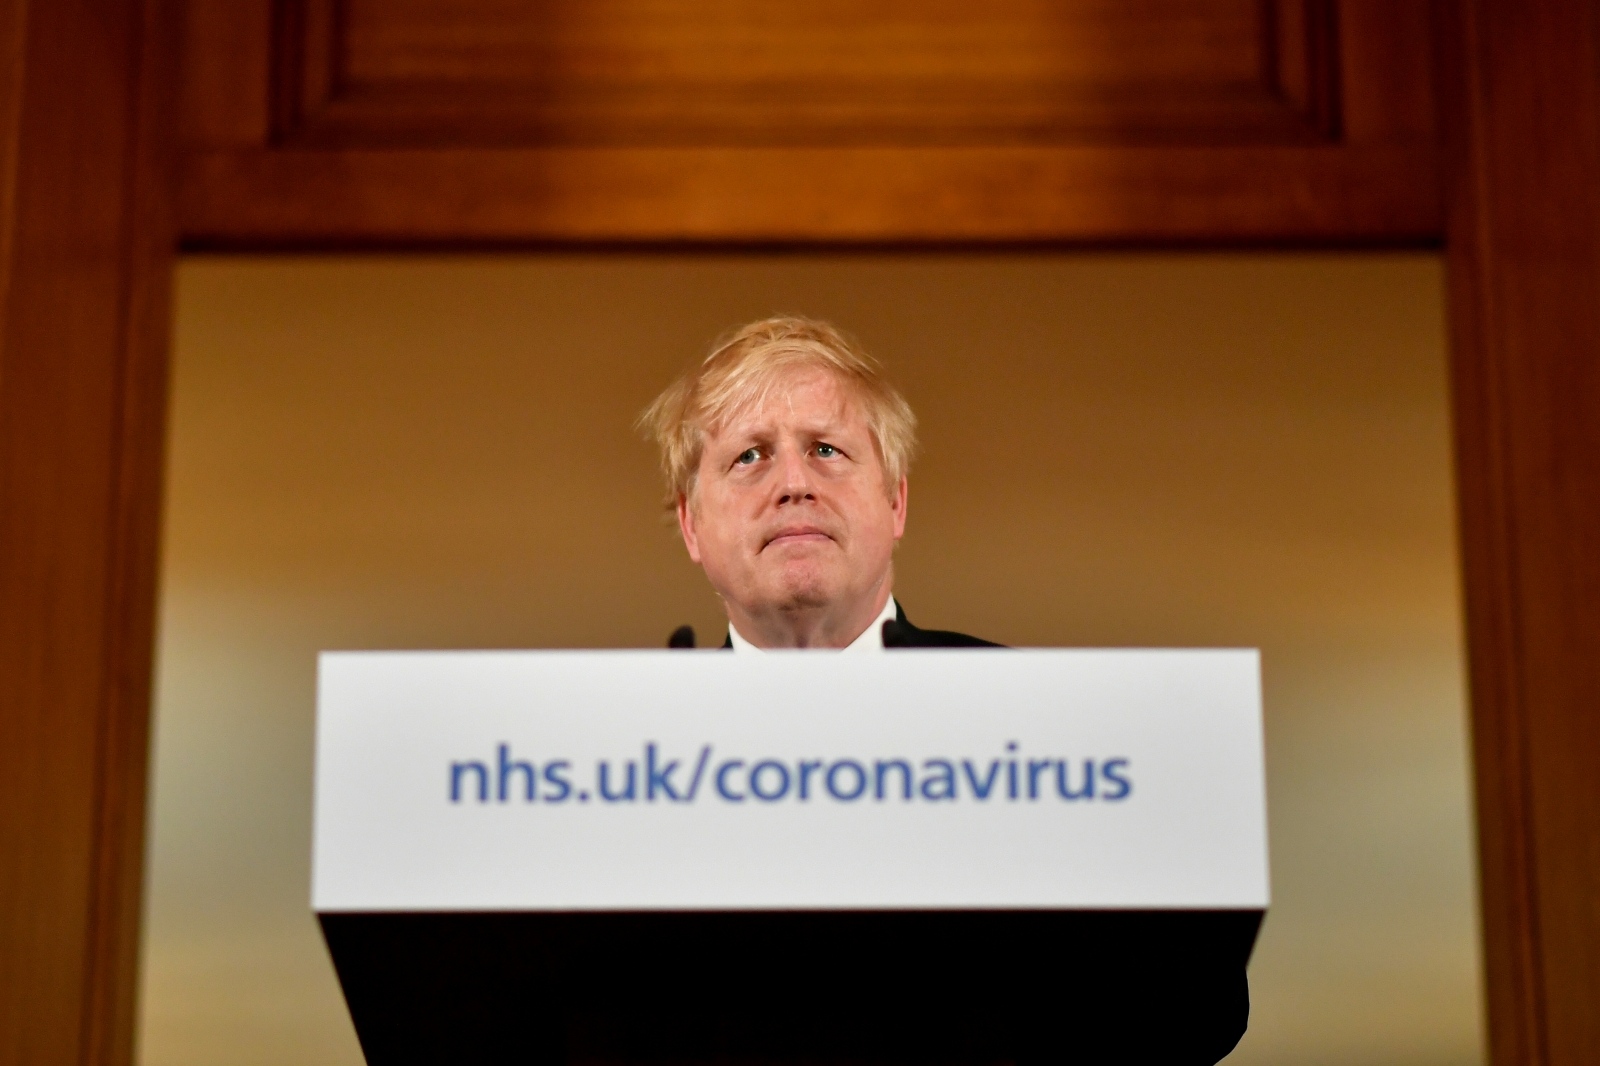 British PM Johnson gives daily address to nation on coronavirus in London British Prime Minister Boris Johnson looks on during a coronavirus disease (COVID-19) news conference inside 10 Downing Street, London, Britain March 19, 2020.  Leon Neal/Pool via REUTERS POOL